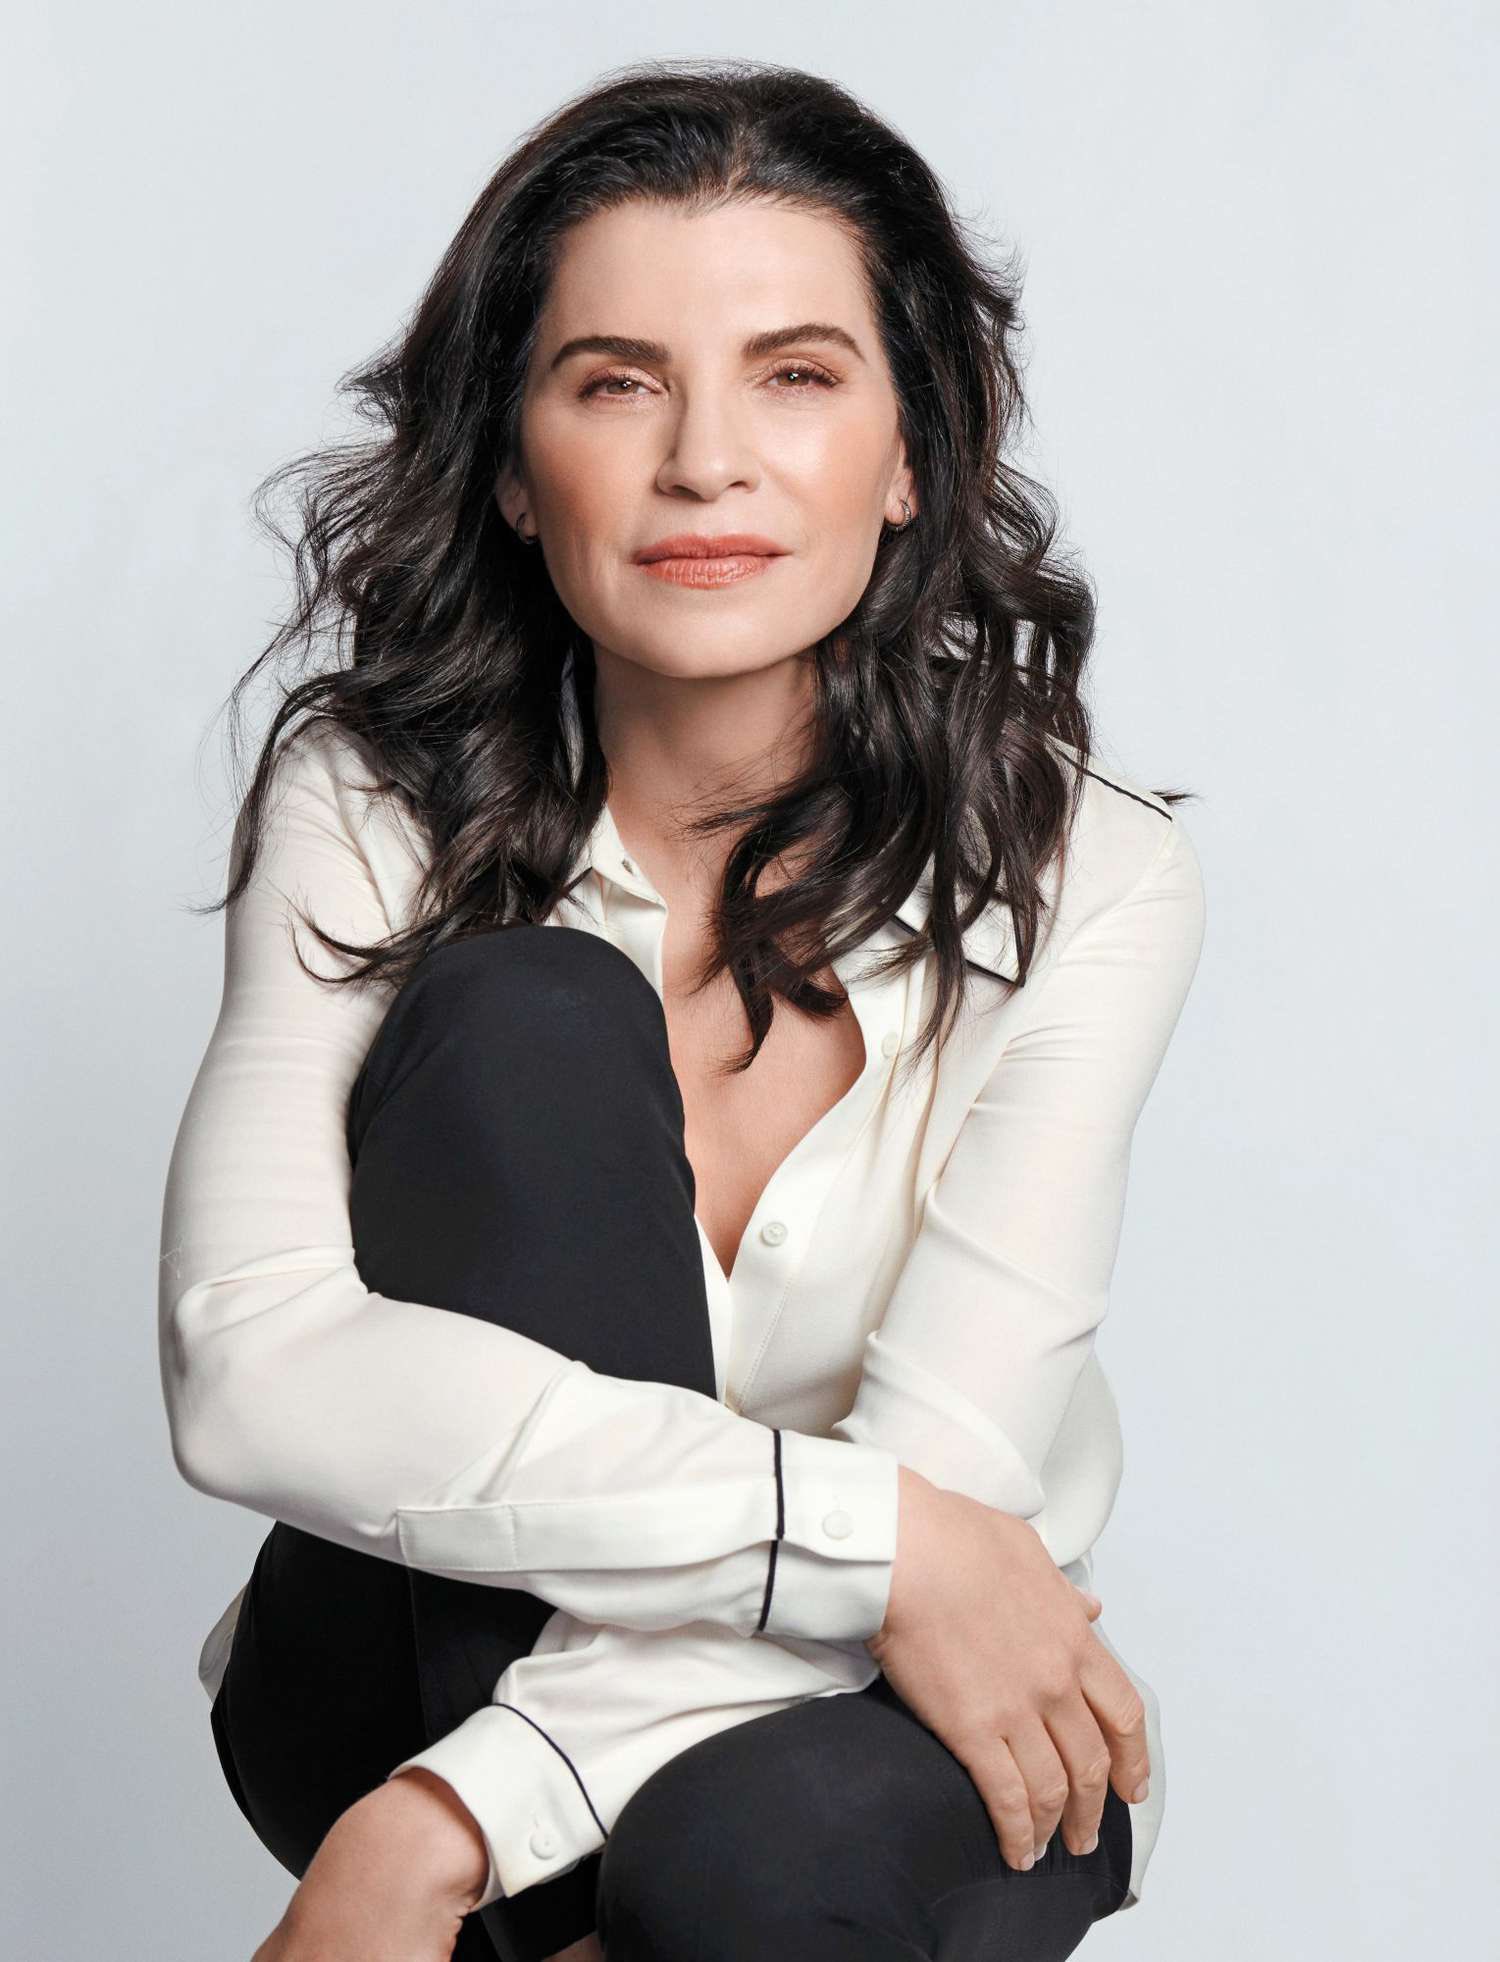 Happy 57th Birthday to American actress, Julianna Margulies!  